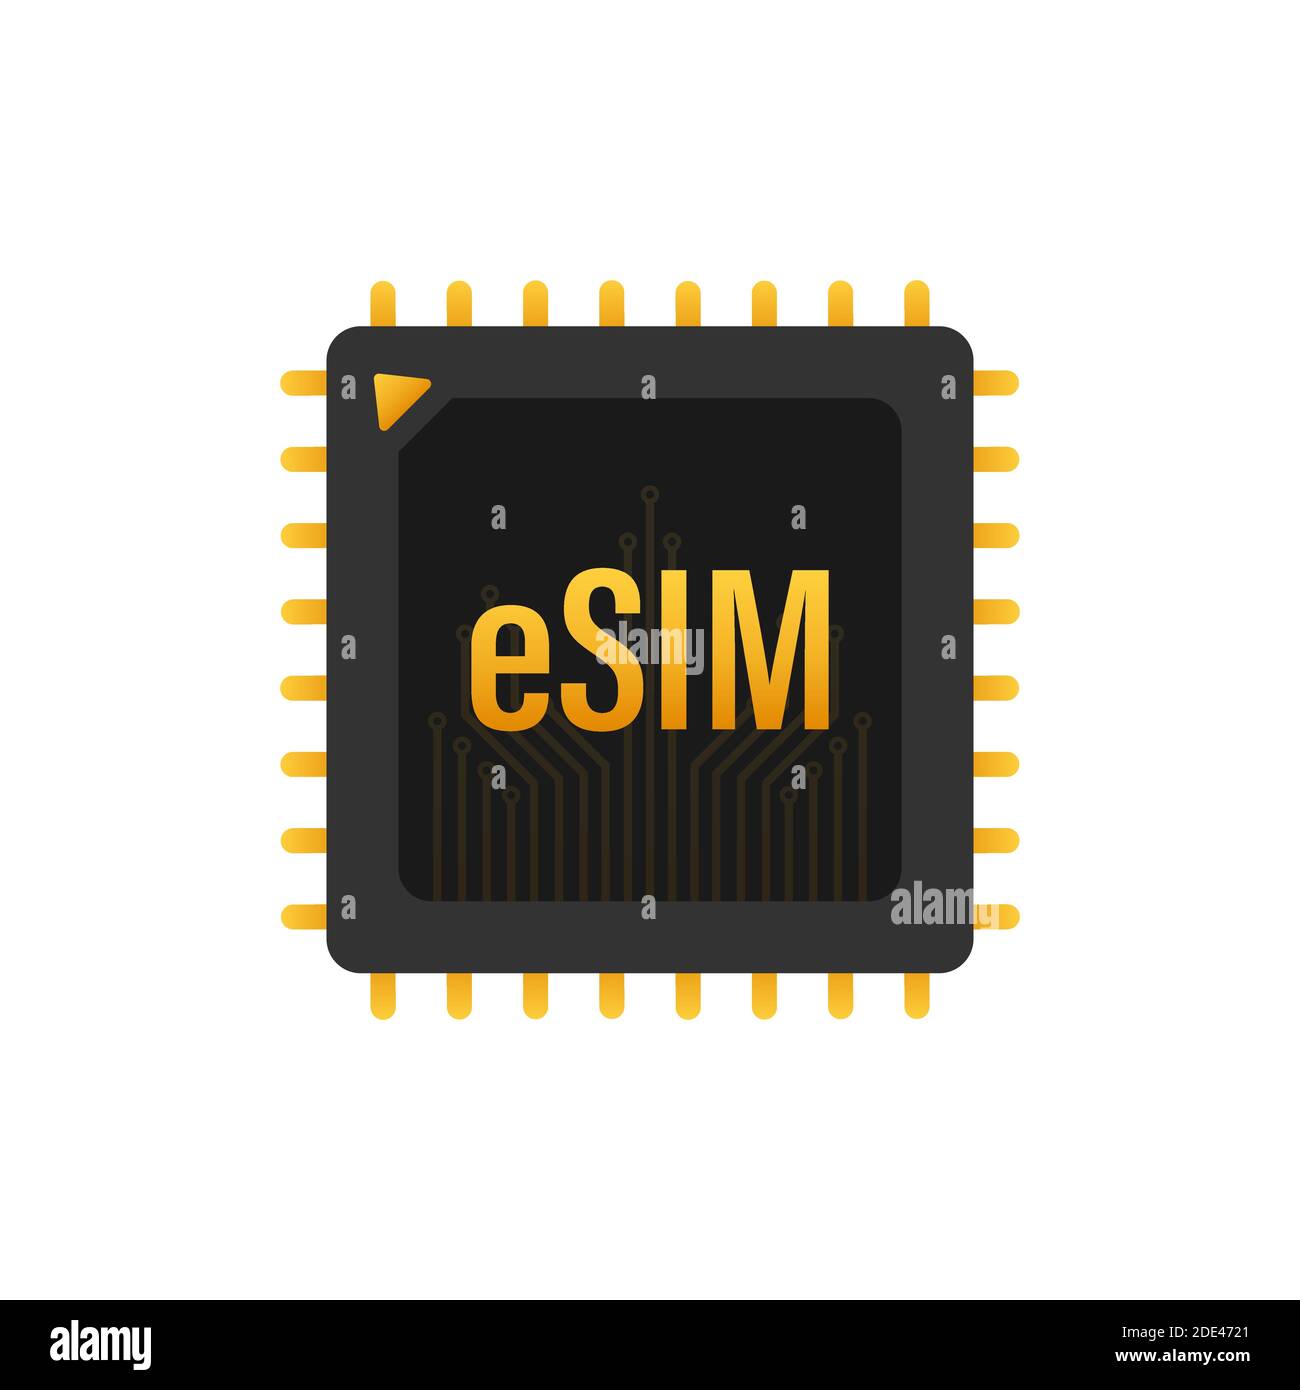 eSIM Embedded SIM card icon symbol concept. new chip mobile cellular communication technology. Vector stock illustration. Stock Vector